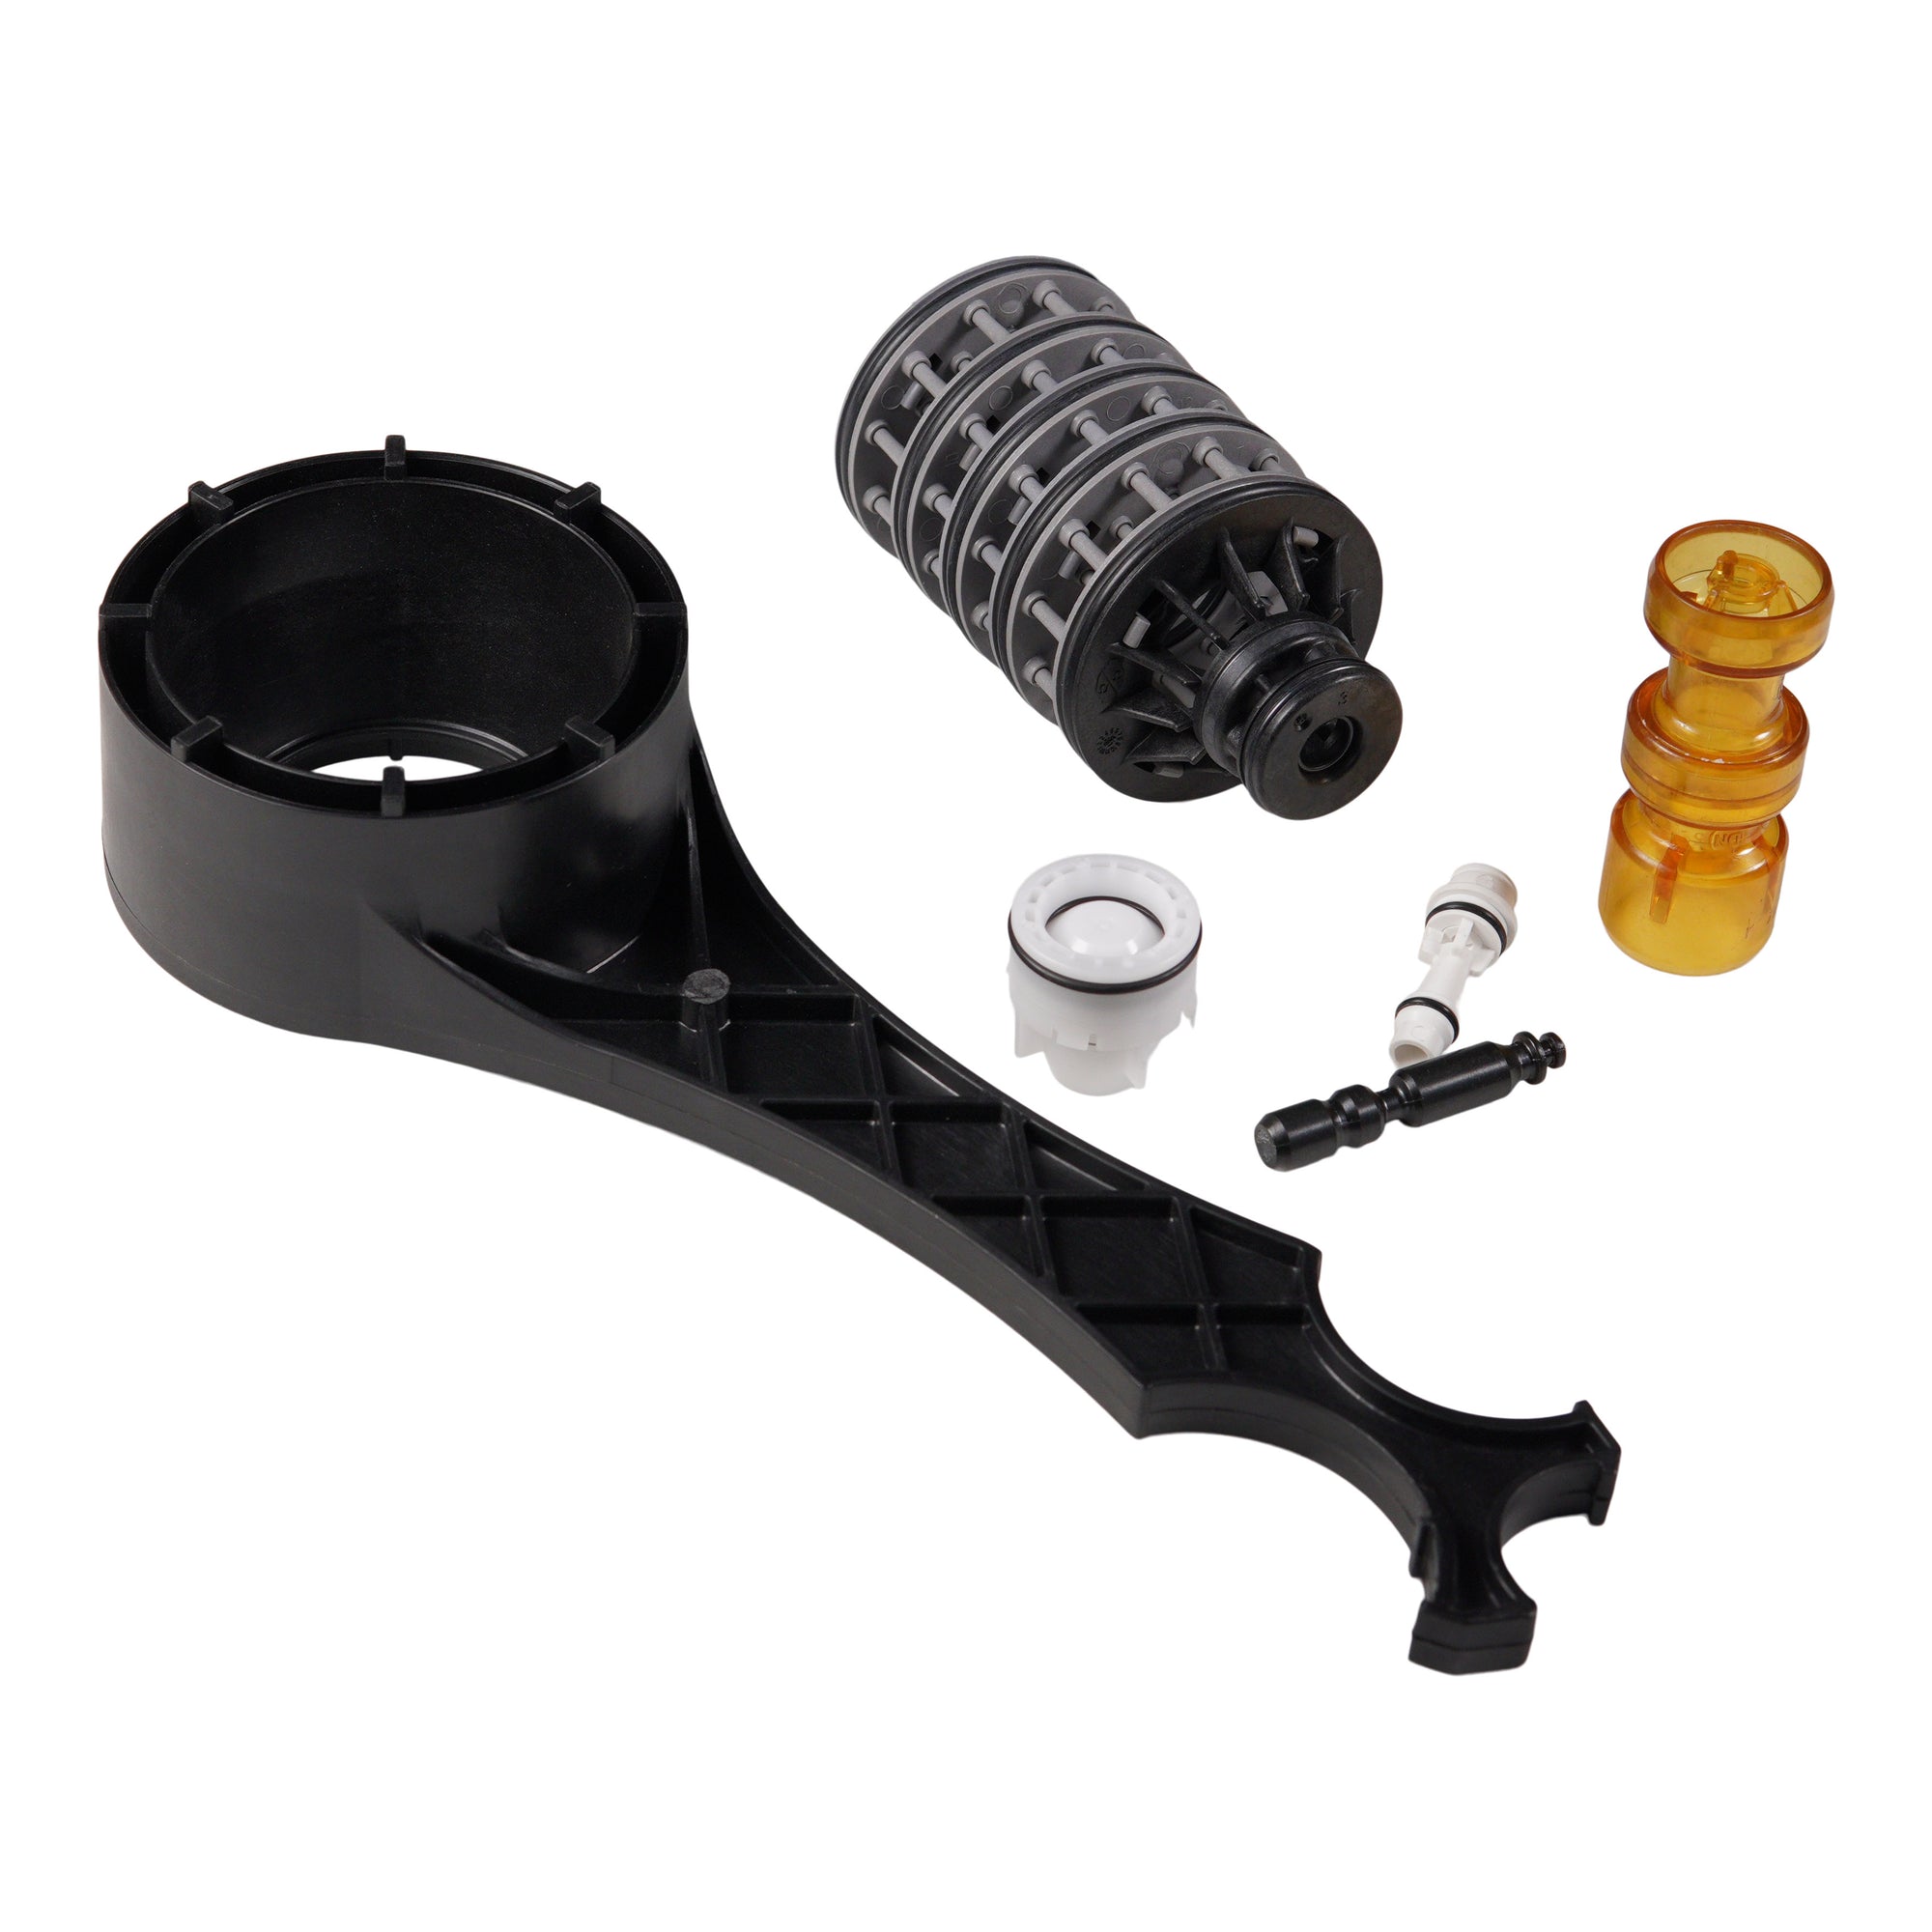 Clack WS1 FOB/C/K Rebuild KIT with White Injector & Wrench